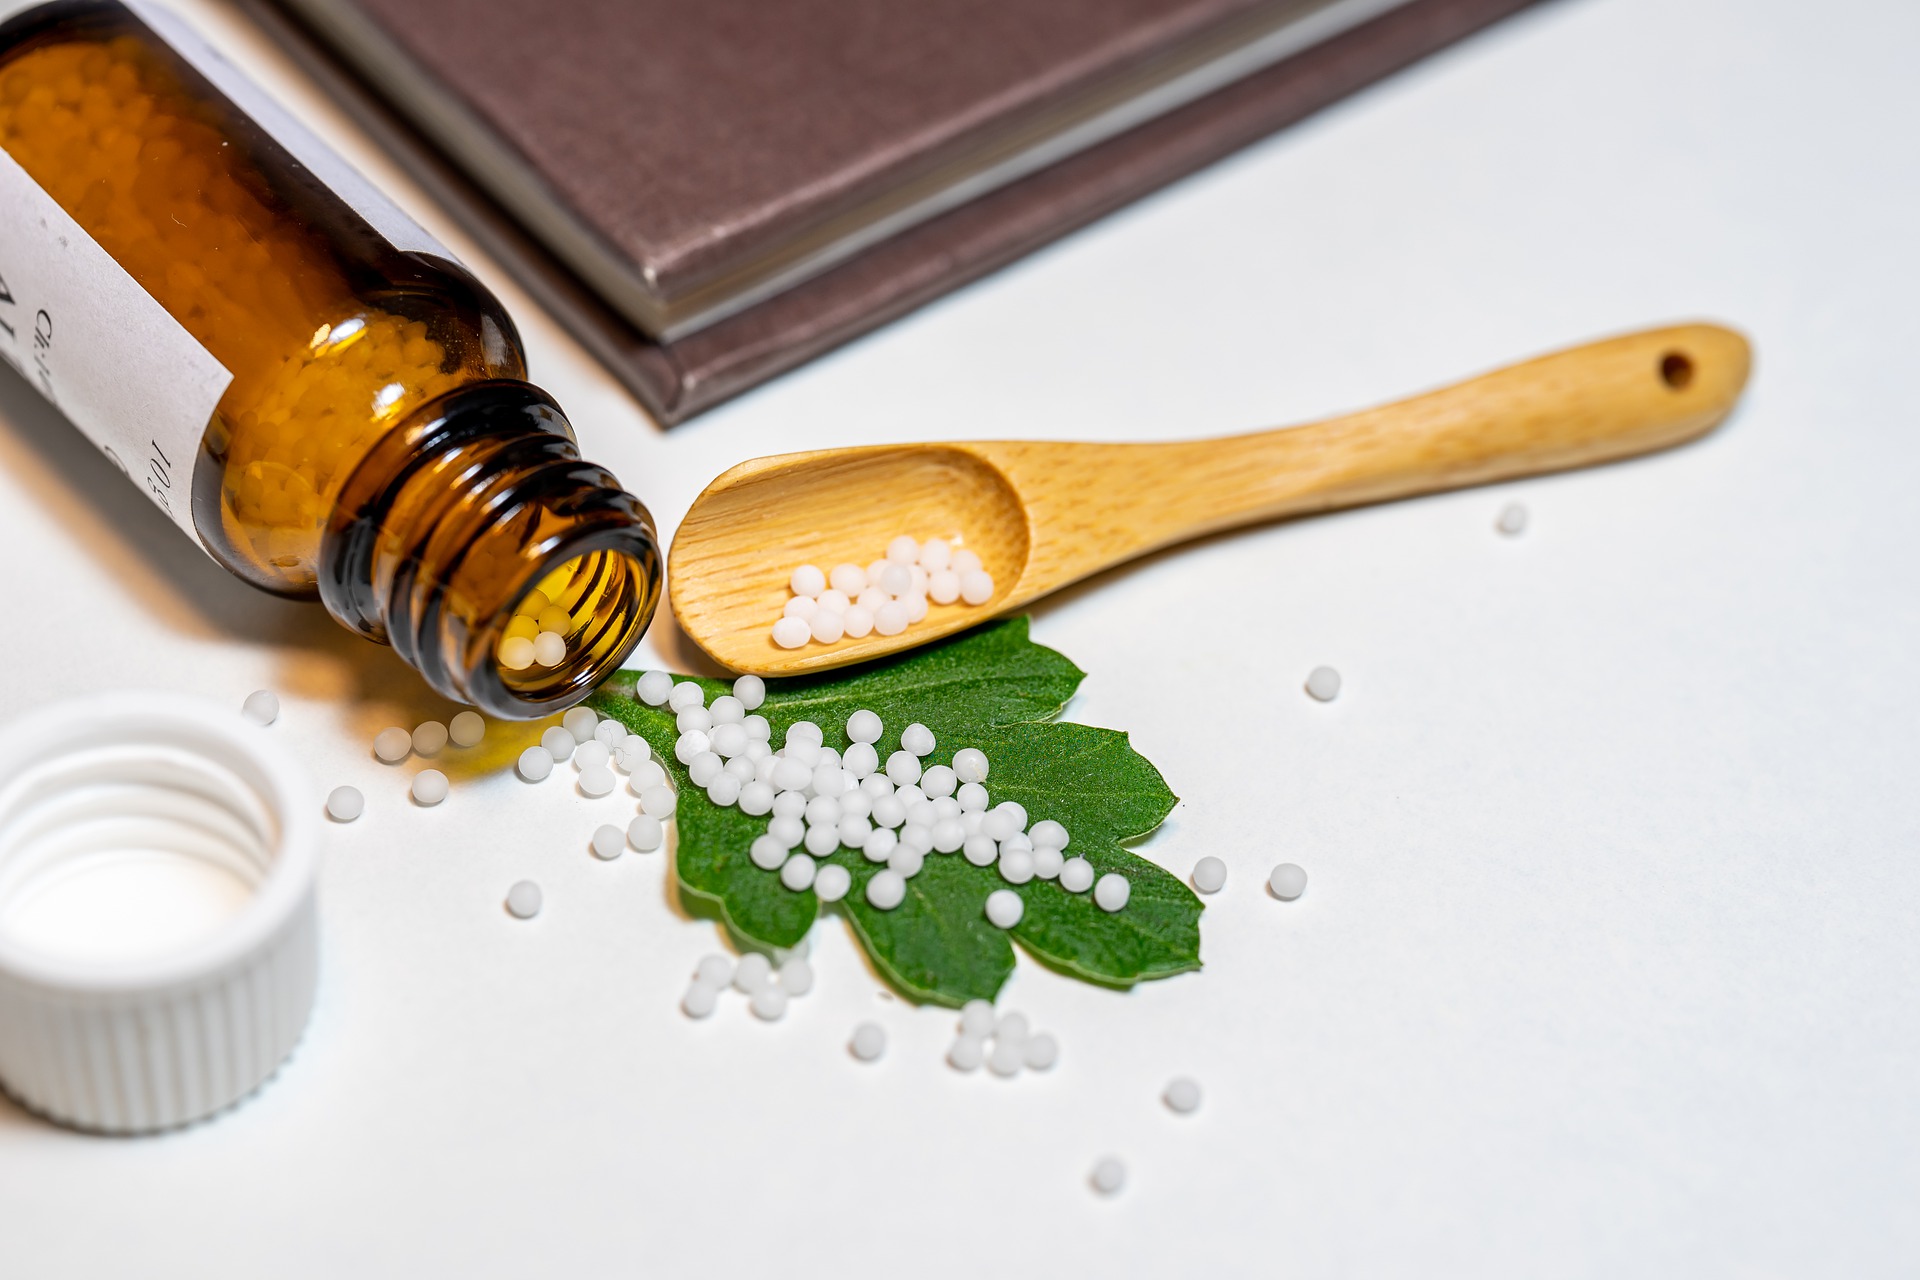 Global Homeopathy Market Trends Analysis Report Includes Industry Growth & Obstacles